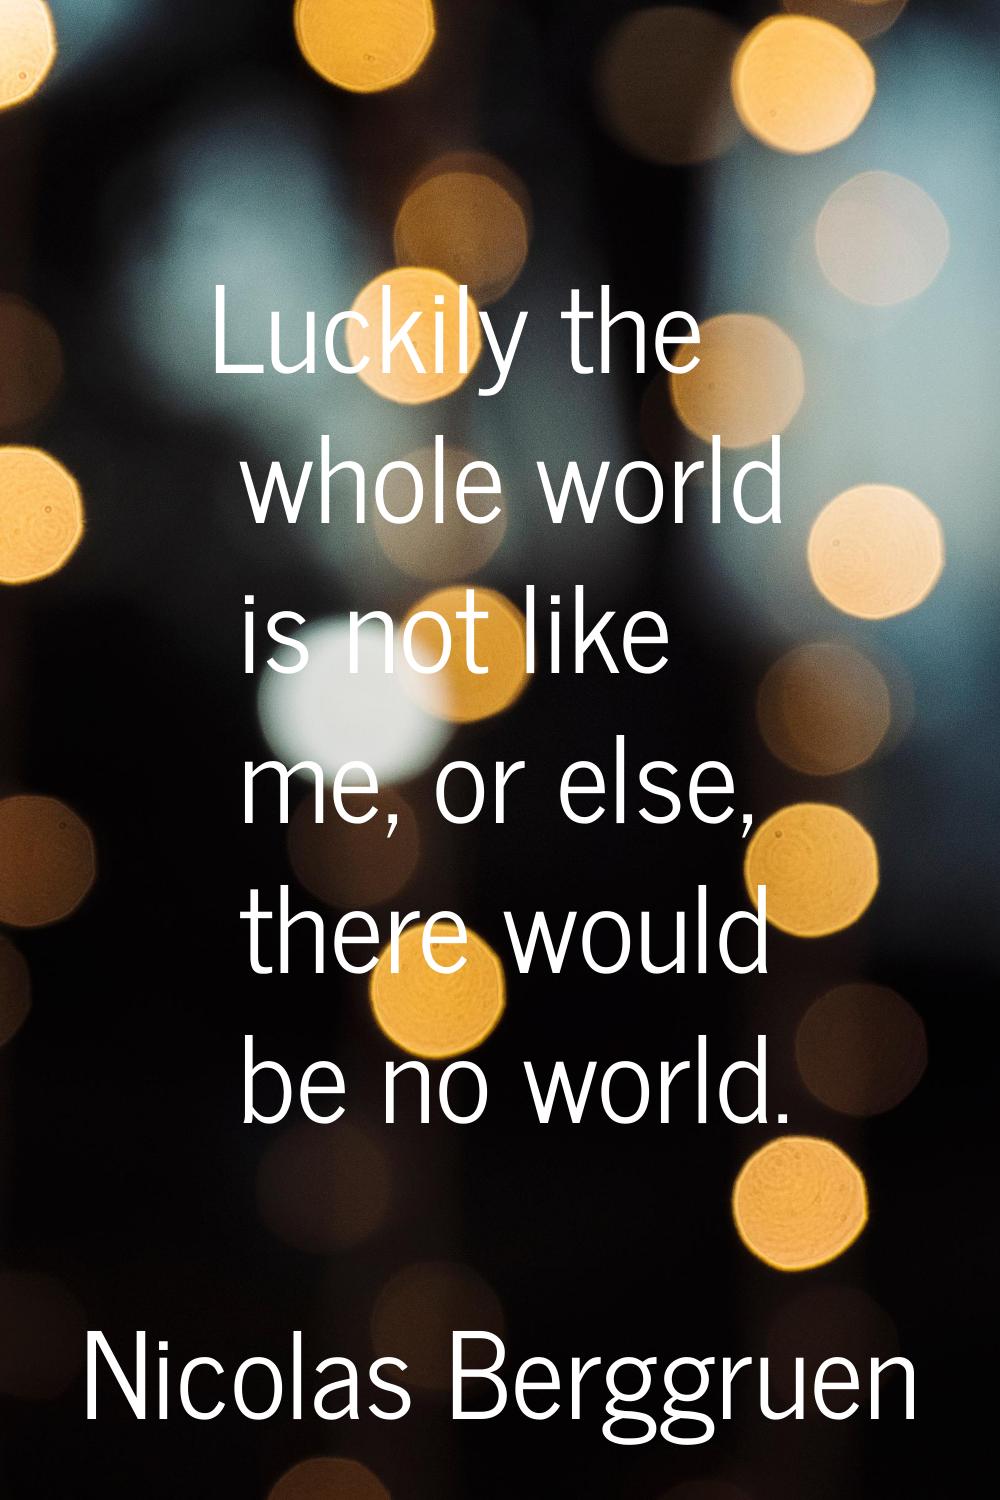 Luckily the whole world is not like me, or else, there would be no world.